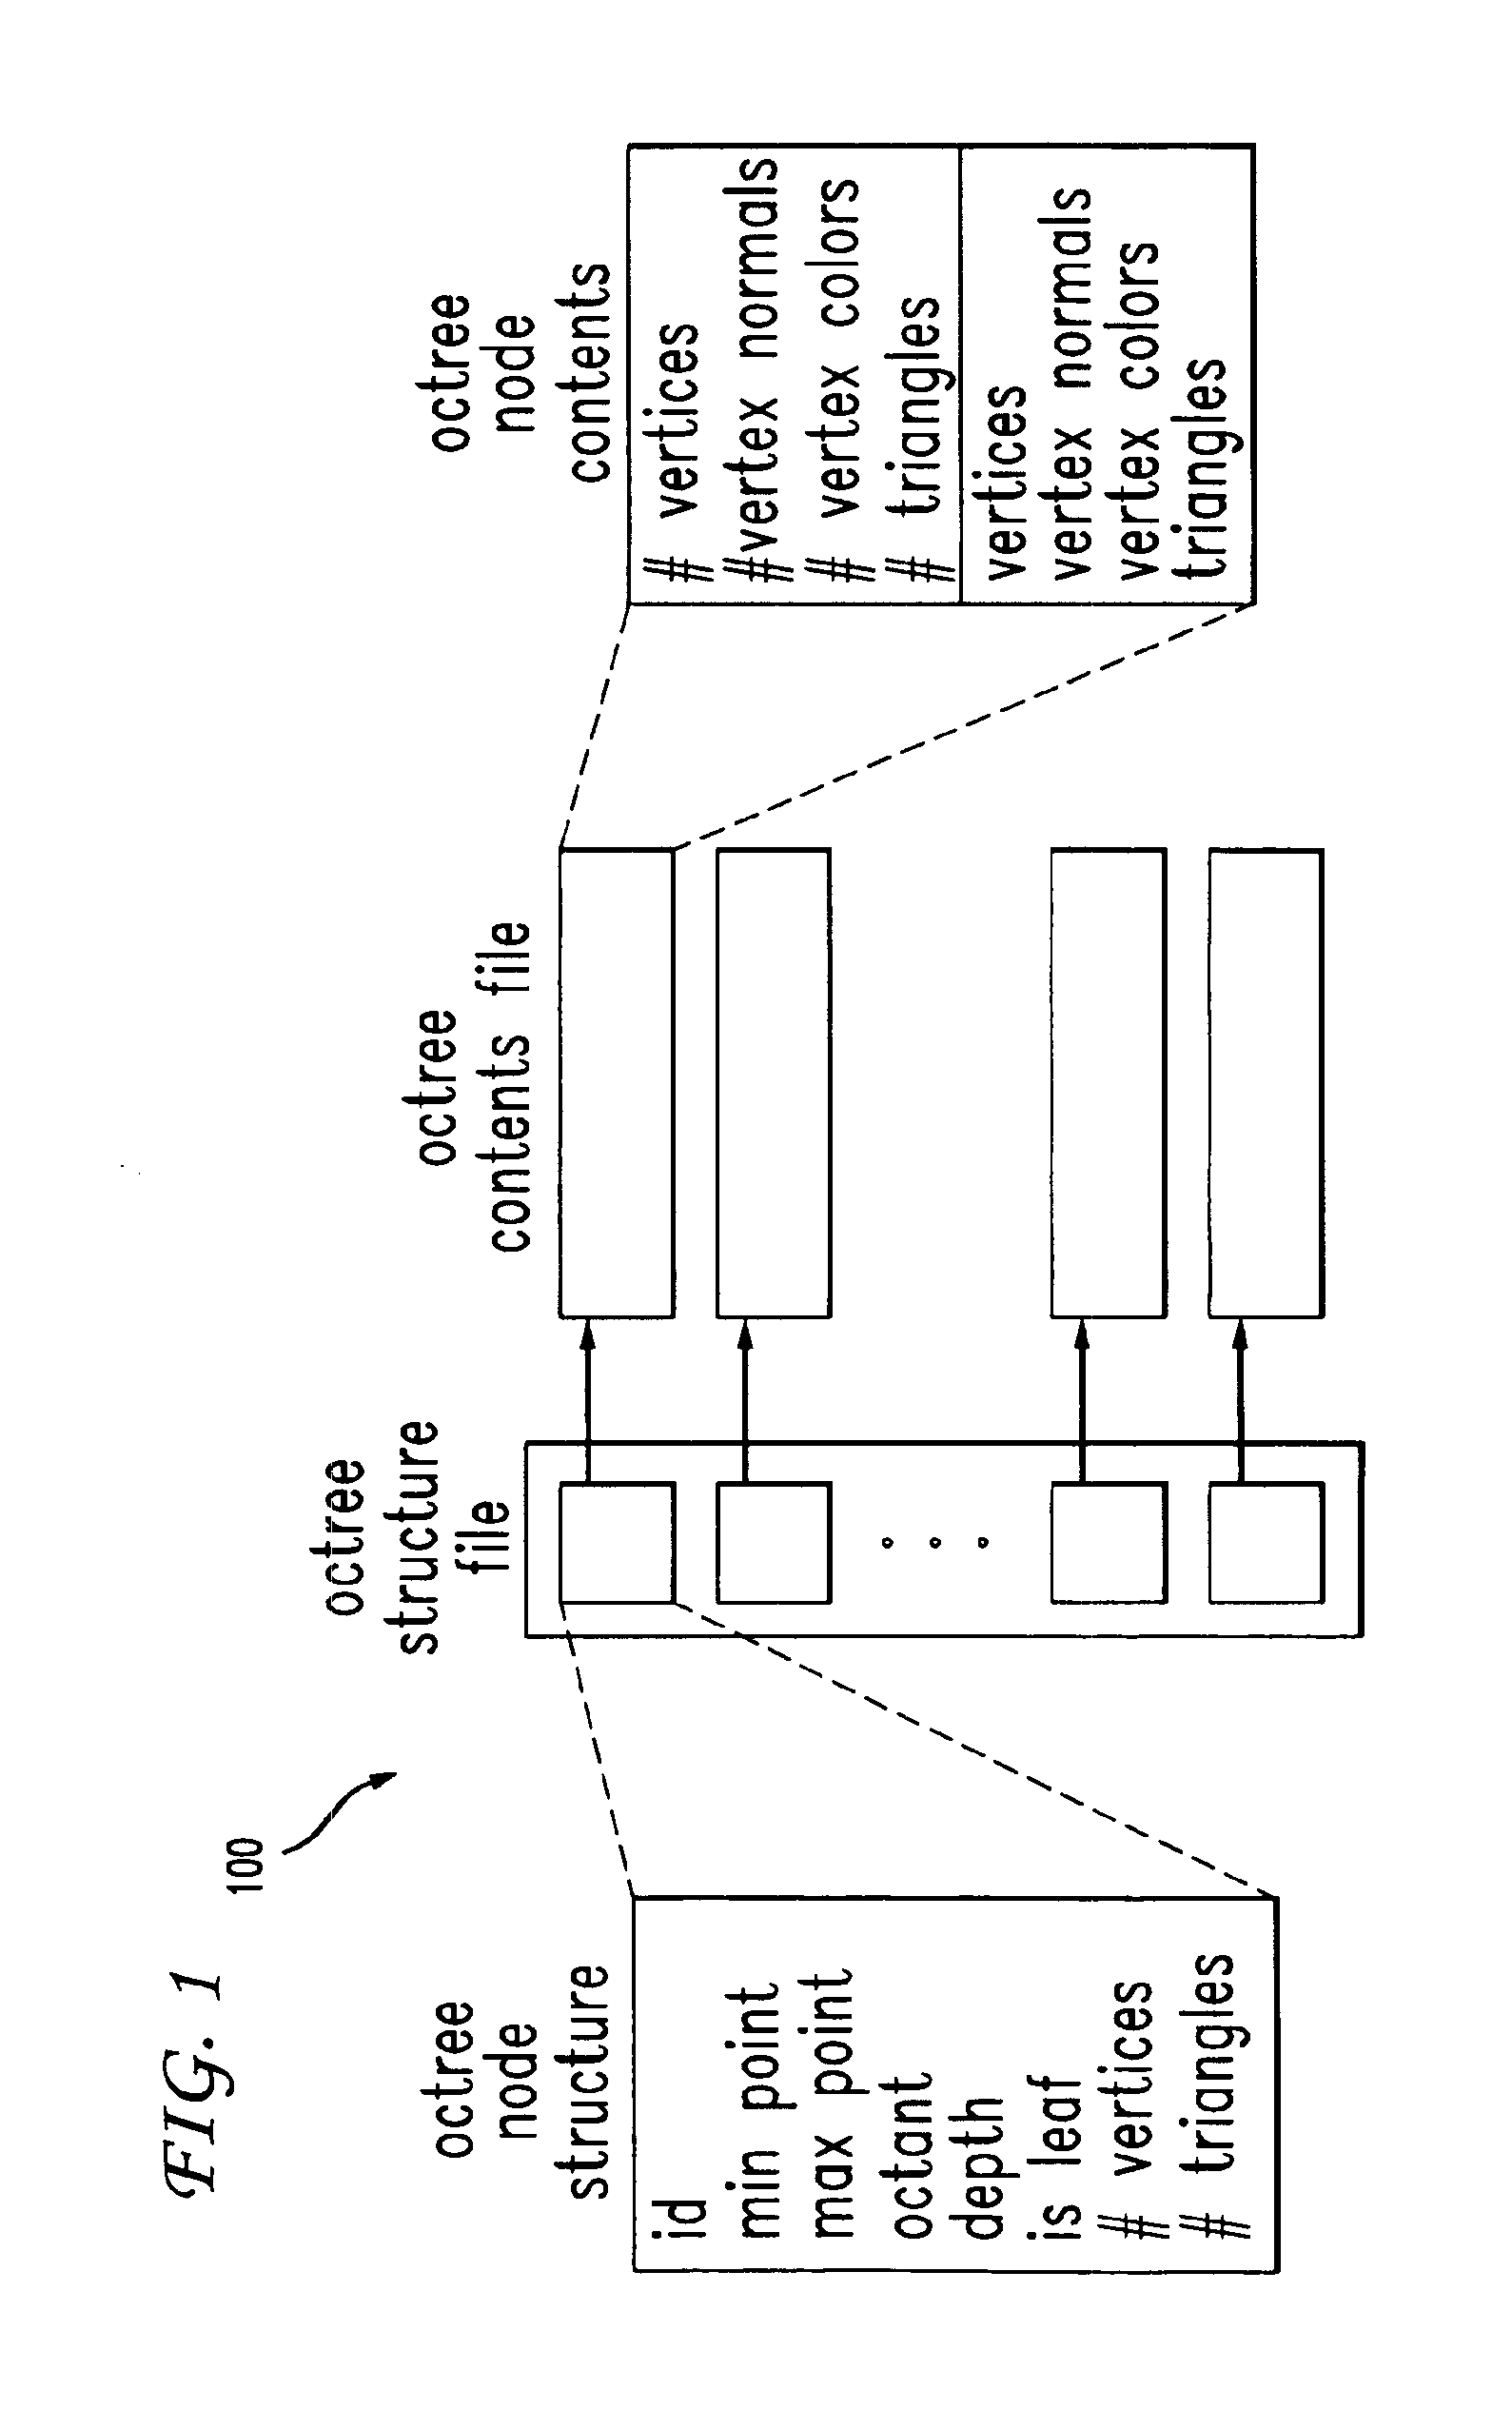 Method for out-of core rendering of large 3D models